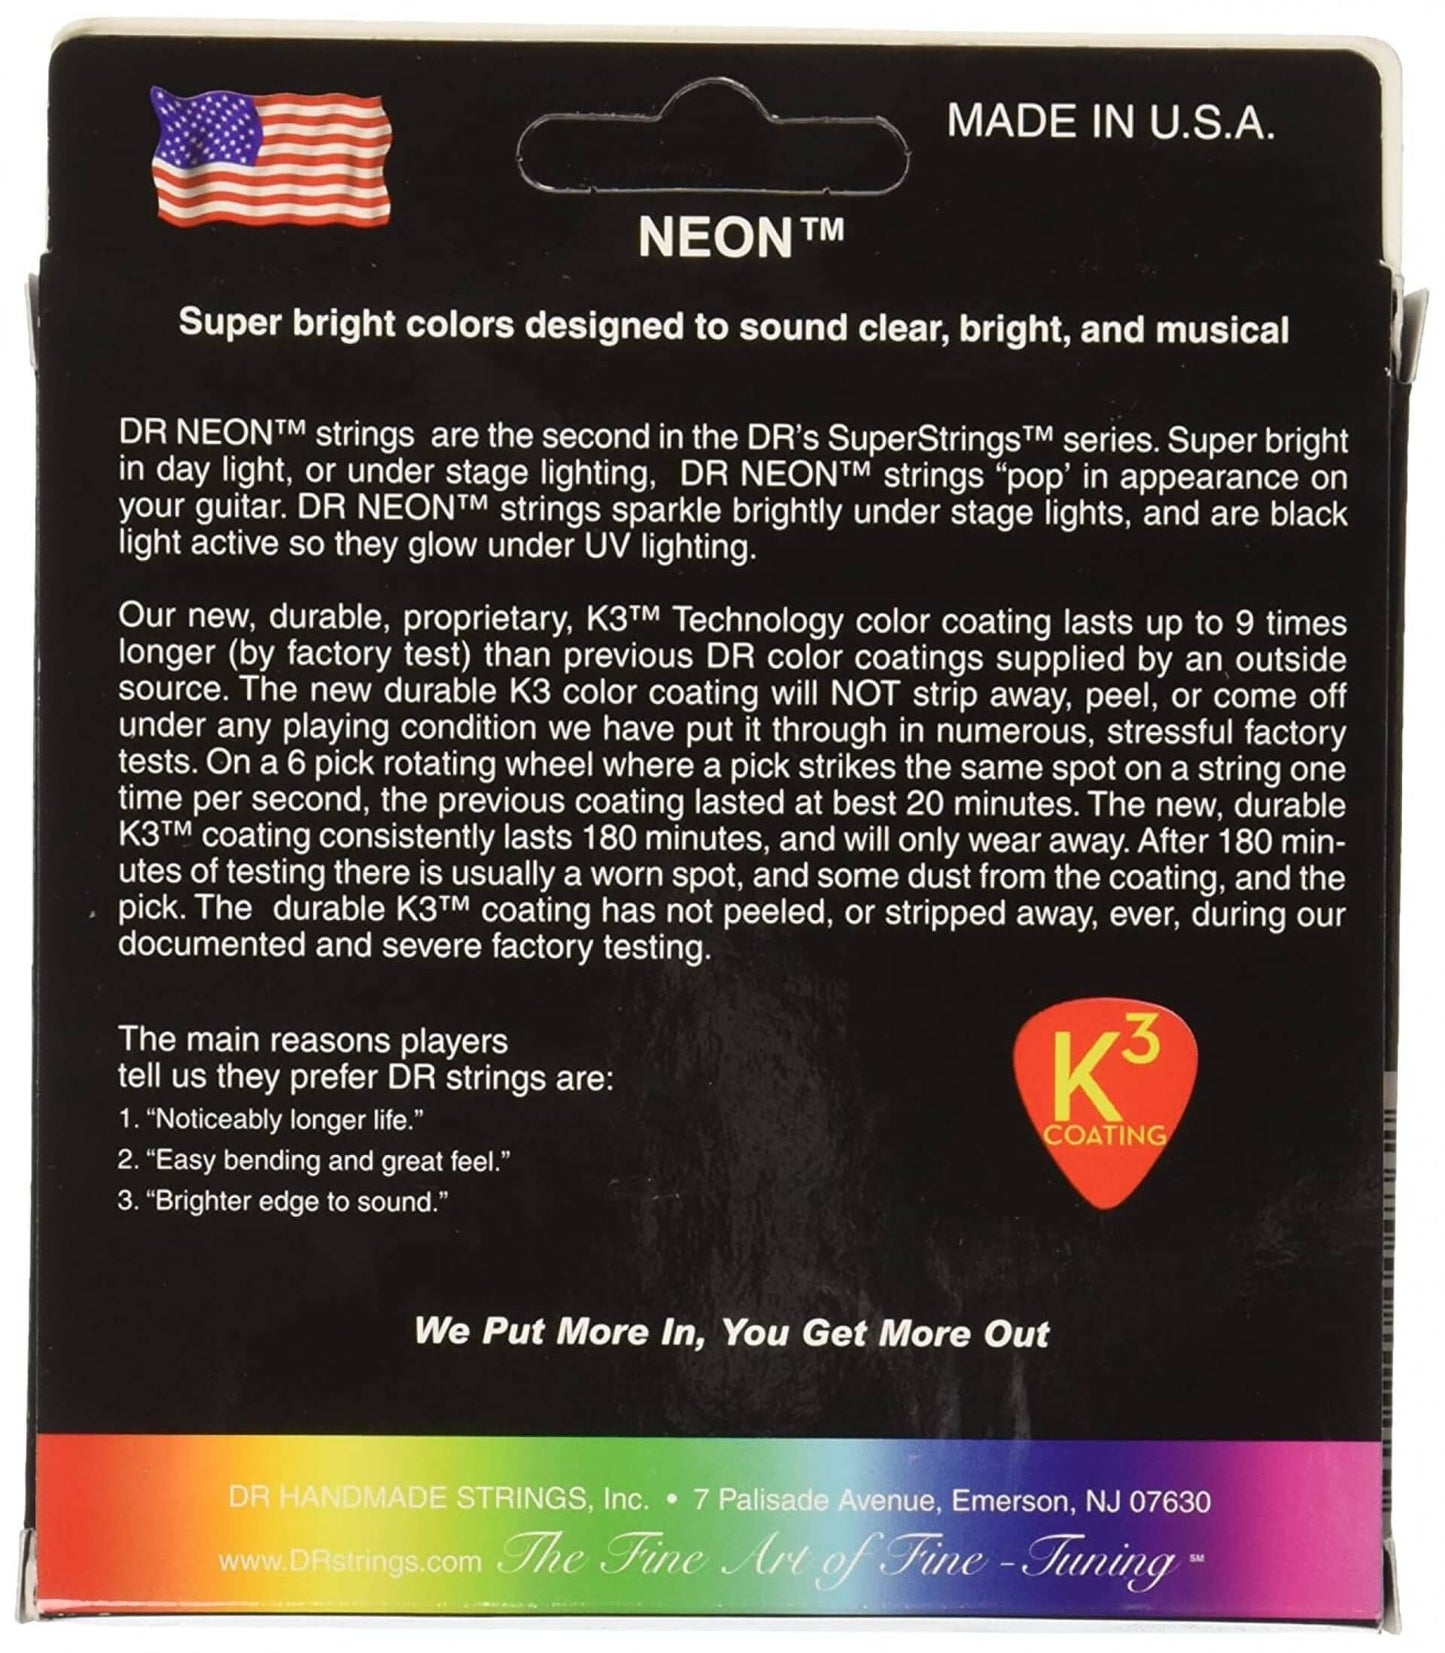 DR Strings NMCA-10 HI-DEF NEON Multicolor Colored Acoustic Guitar Strings 10-48, Extra Light